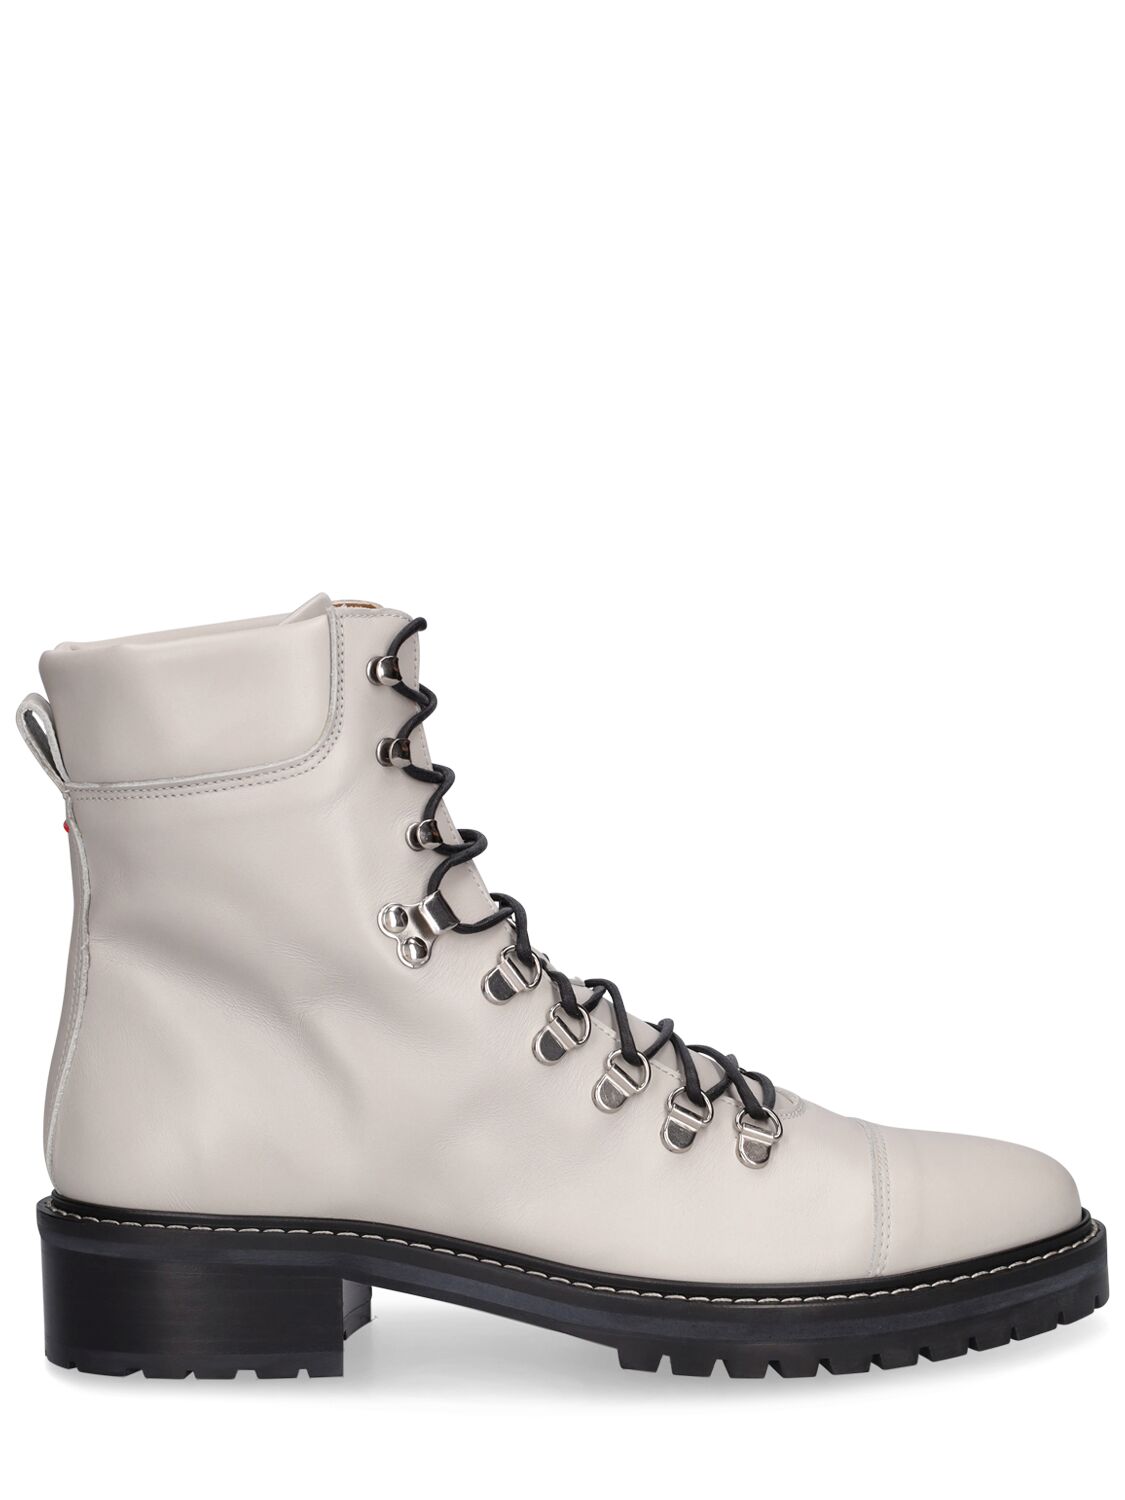 45mm Fiona Leather Hiking Boots